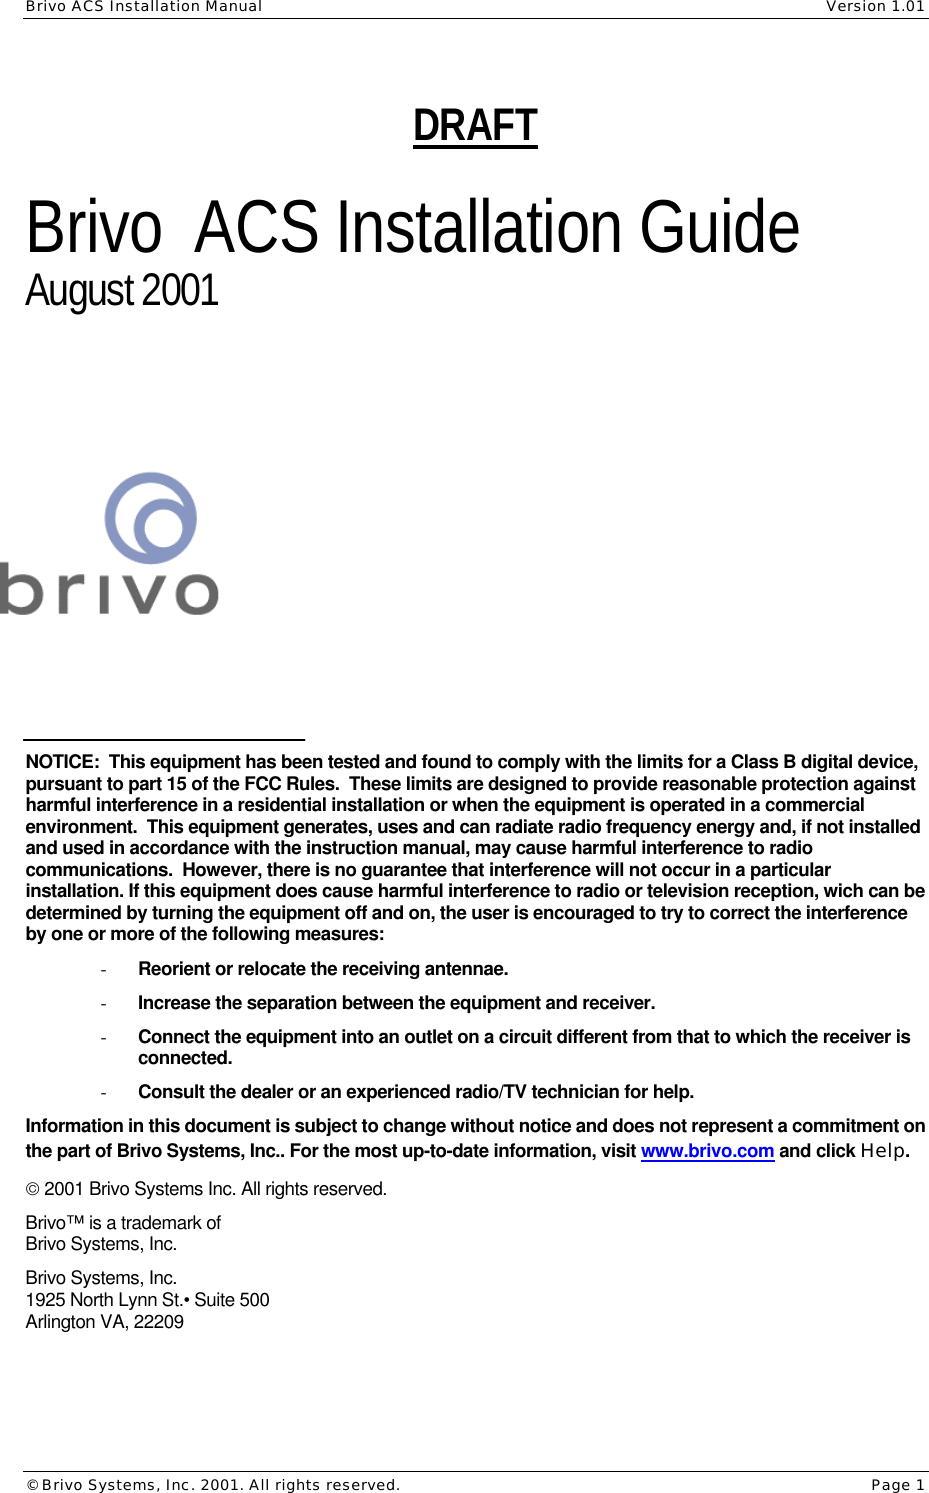 Brivo ACS Installation Manual    Version 1.01 © Brivo Systems, Inc. 2001. All rights reserved.    Page 1 DRAFT  Brivo  ACS Installation Guide August 2001        NOTICE:  This equipment has been tested and found to comply with the limits for a Class B digital device, pursuant to part 15 of the FCC Rules.  These limits are designed to provide reasonable protection against harmful interference in a residential installation or when the equipment is operated in a commercial environment.  This equipment generates, uses and can radiate radio frequency energy and, if not installed and used in accordance with the instruction manual, may cause harmful interference to radio communications.  However, there is no guarantee that interference will not occur in a particular installation. If this equipment does cause harmful interference to radio or television reception, wich can be determined by turning the equipment off and on, the user is encouraged to try to correct the interference by one or more of the following measures: - Reorient or relocate the receiving antennae. - Increase the separation between the equipment and receiver. - Connect the equipment into an outlet on a circuit different from that to which the receiver is connected. - Consult the dealer or an experienced radio/TV technician for help. Information in this document is subject to change without notice and does not represent a commitment on the part of Brivo Systems, Inc.. For the most up-to-date information, visit www.brivo.com and click Help.  2001 Brivo Systems Inc. All rights reserved.  Brivo™ is a trademark of  Brivo Systems, Inc.  Brivo Systems, Inc. 1925 North Lynn St.• Suite 500 Arlington VA, 22209  